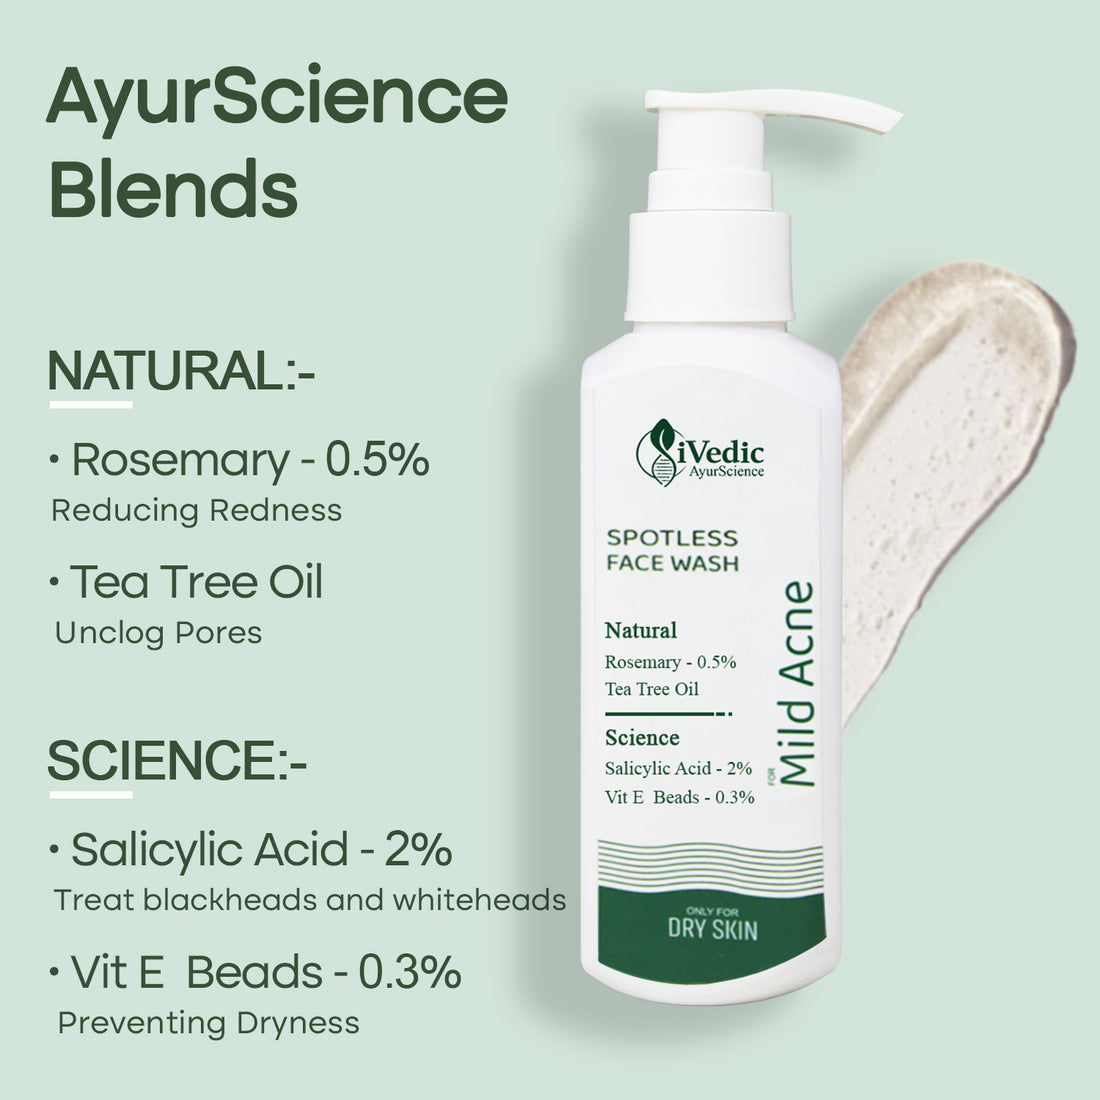 Mild Anti Acne Face Wash Cleanser ( 2% Salicylic Acid,0.3% Vitamin E Beads & 0.5% Rosemary) for Blackheads & Open pores